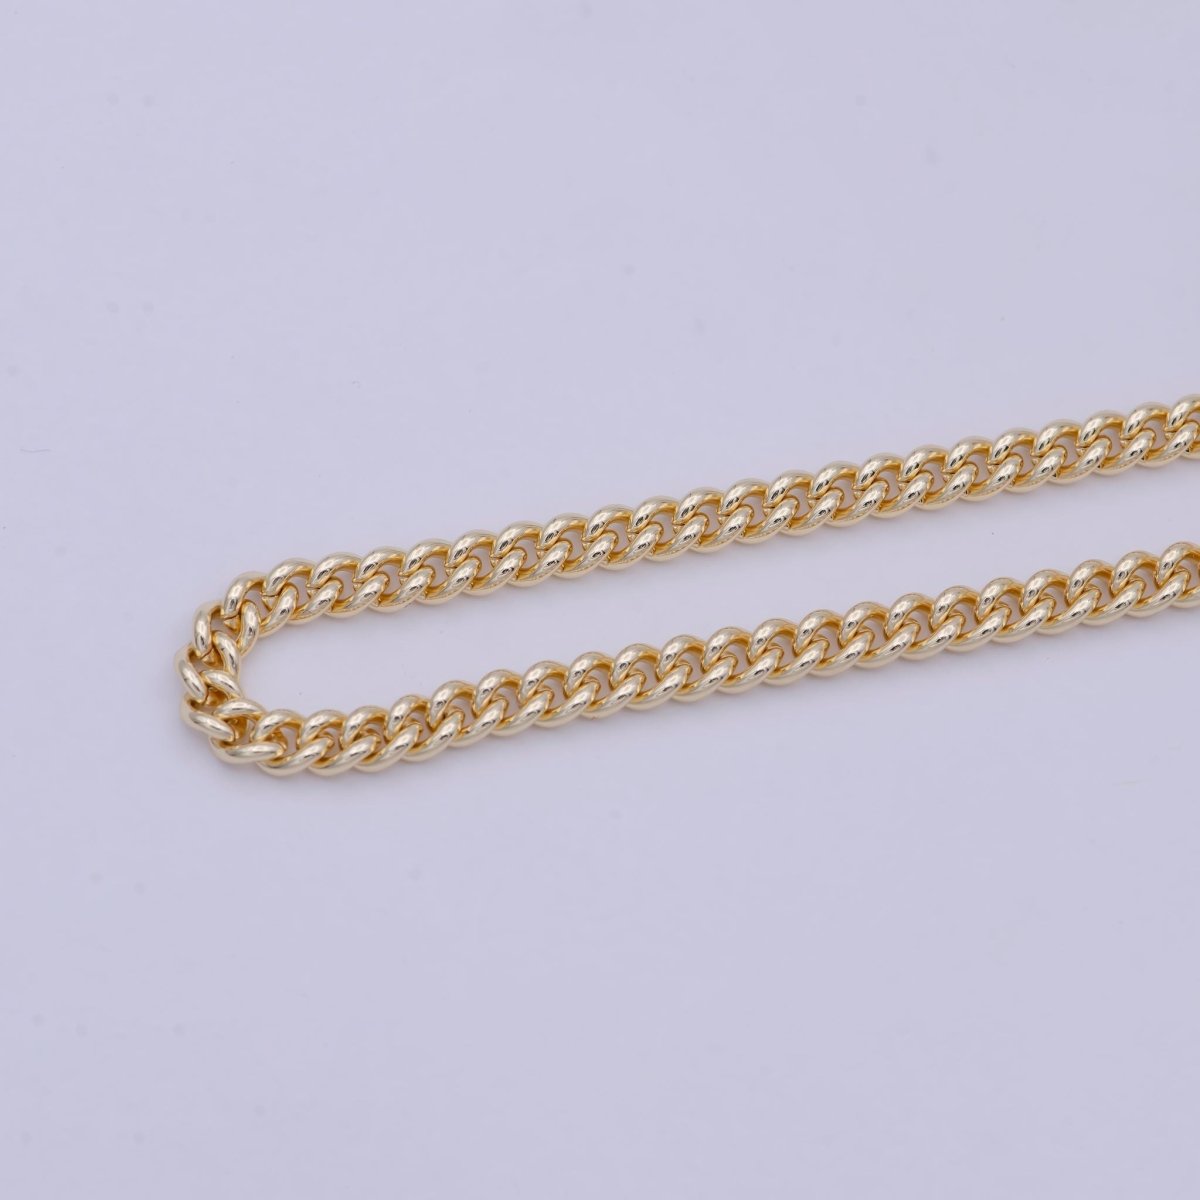 16K Gold Filled Cuban Curb Chain by Yard, Wholesale Bulk Roll Chain for Jewelry Making | ROLL-257 - DLUXCA